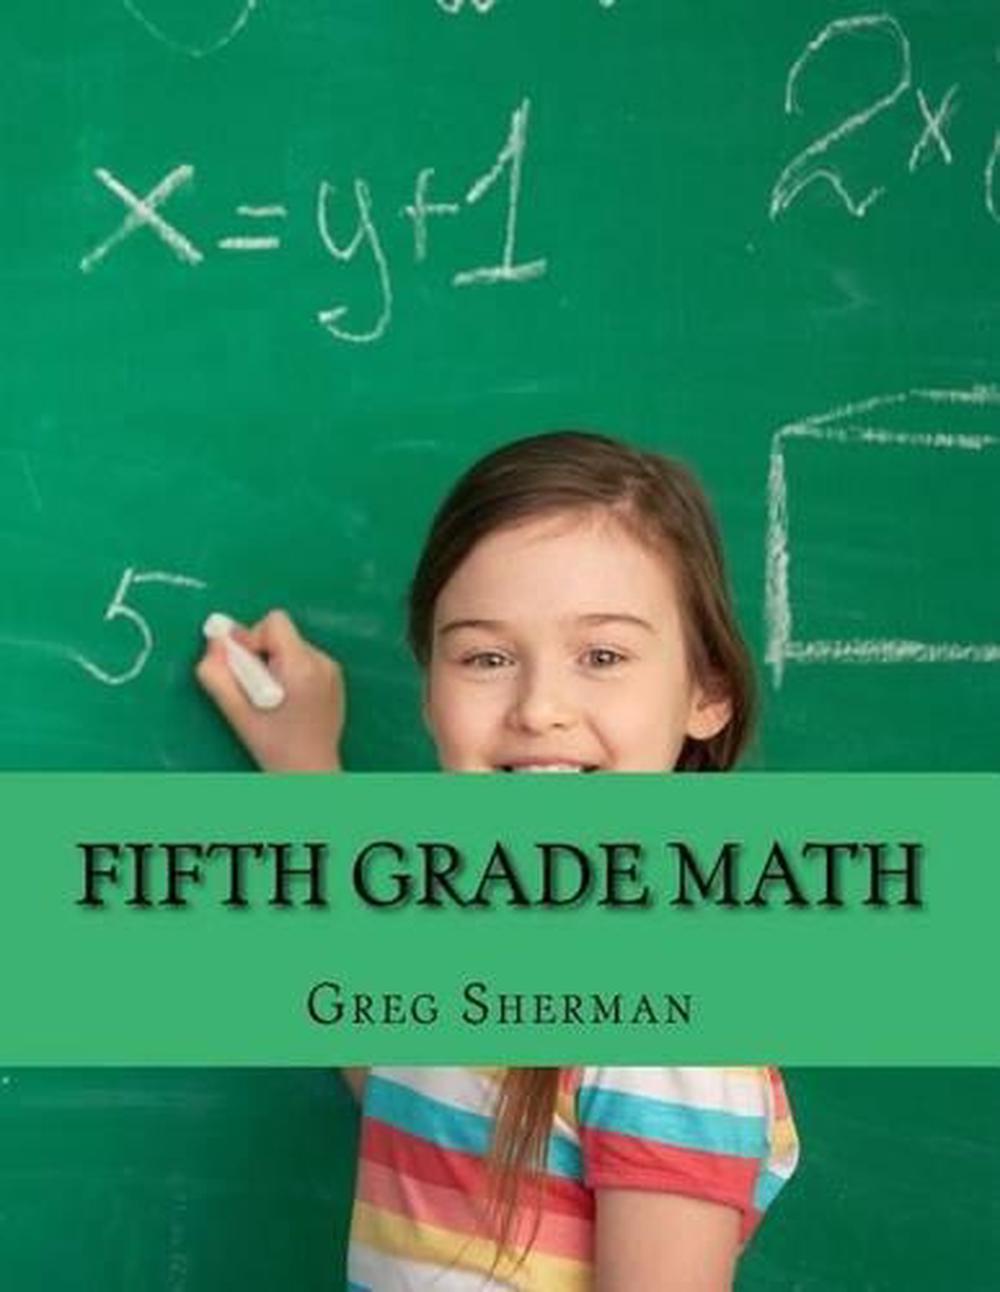 fifth-grade-math-for-home-school-or-extra-practice-by-greg-sherman-english-pa-9781492233749